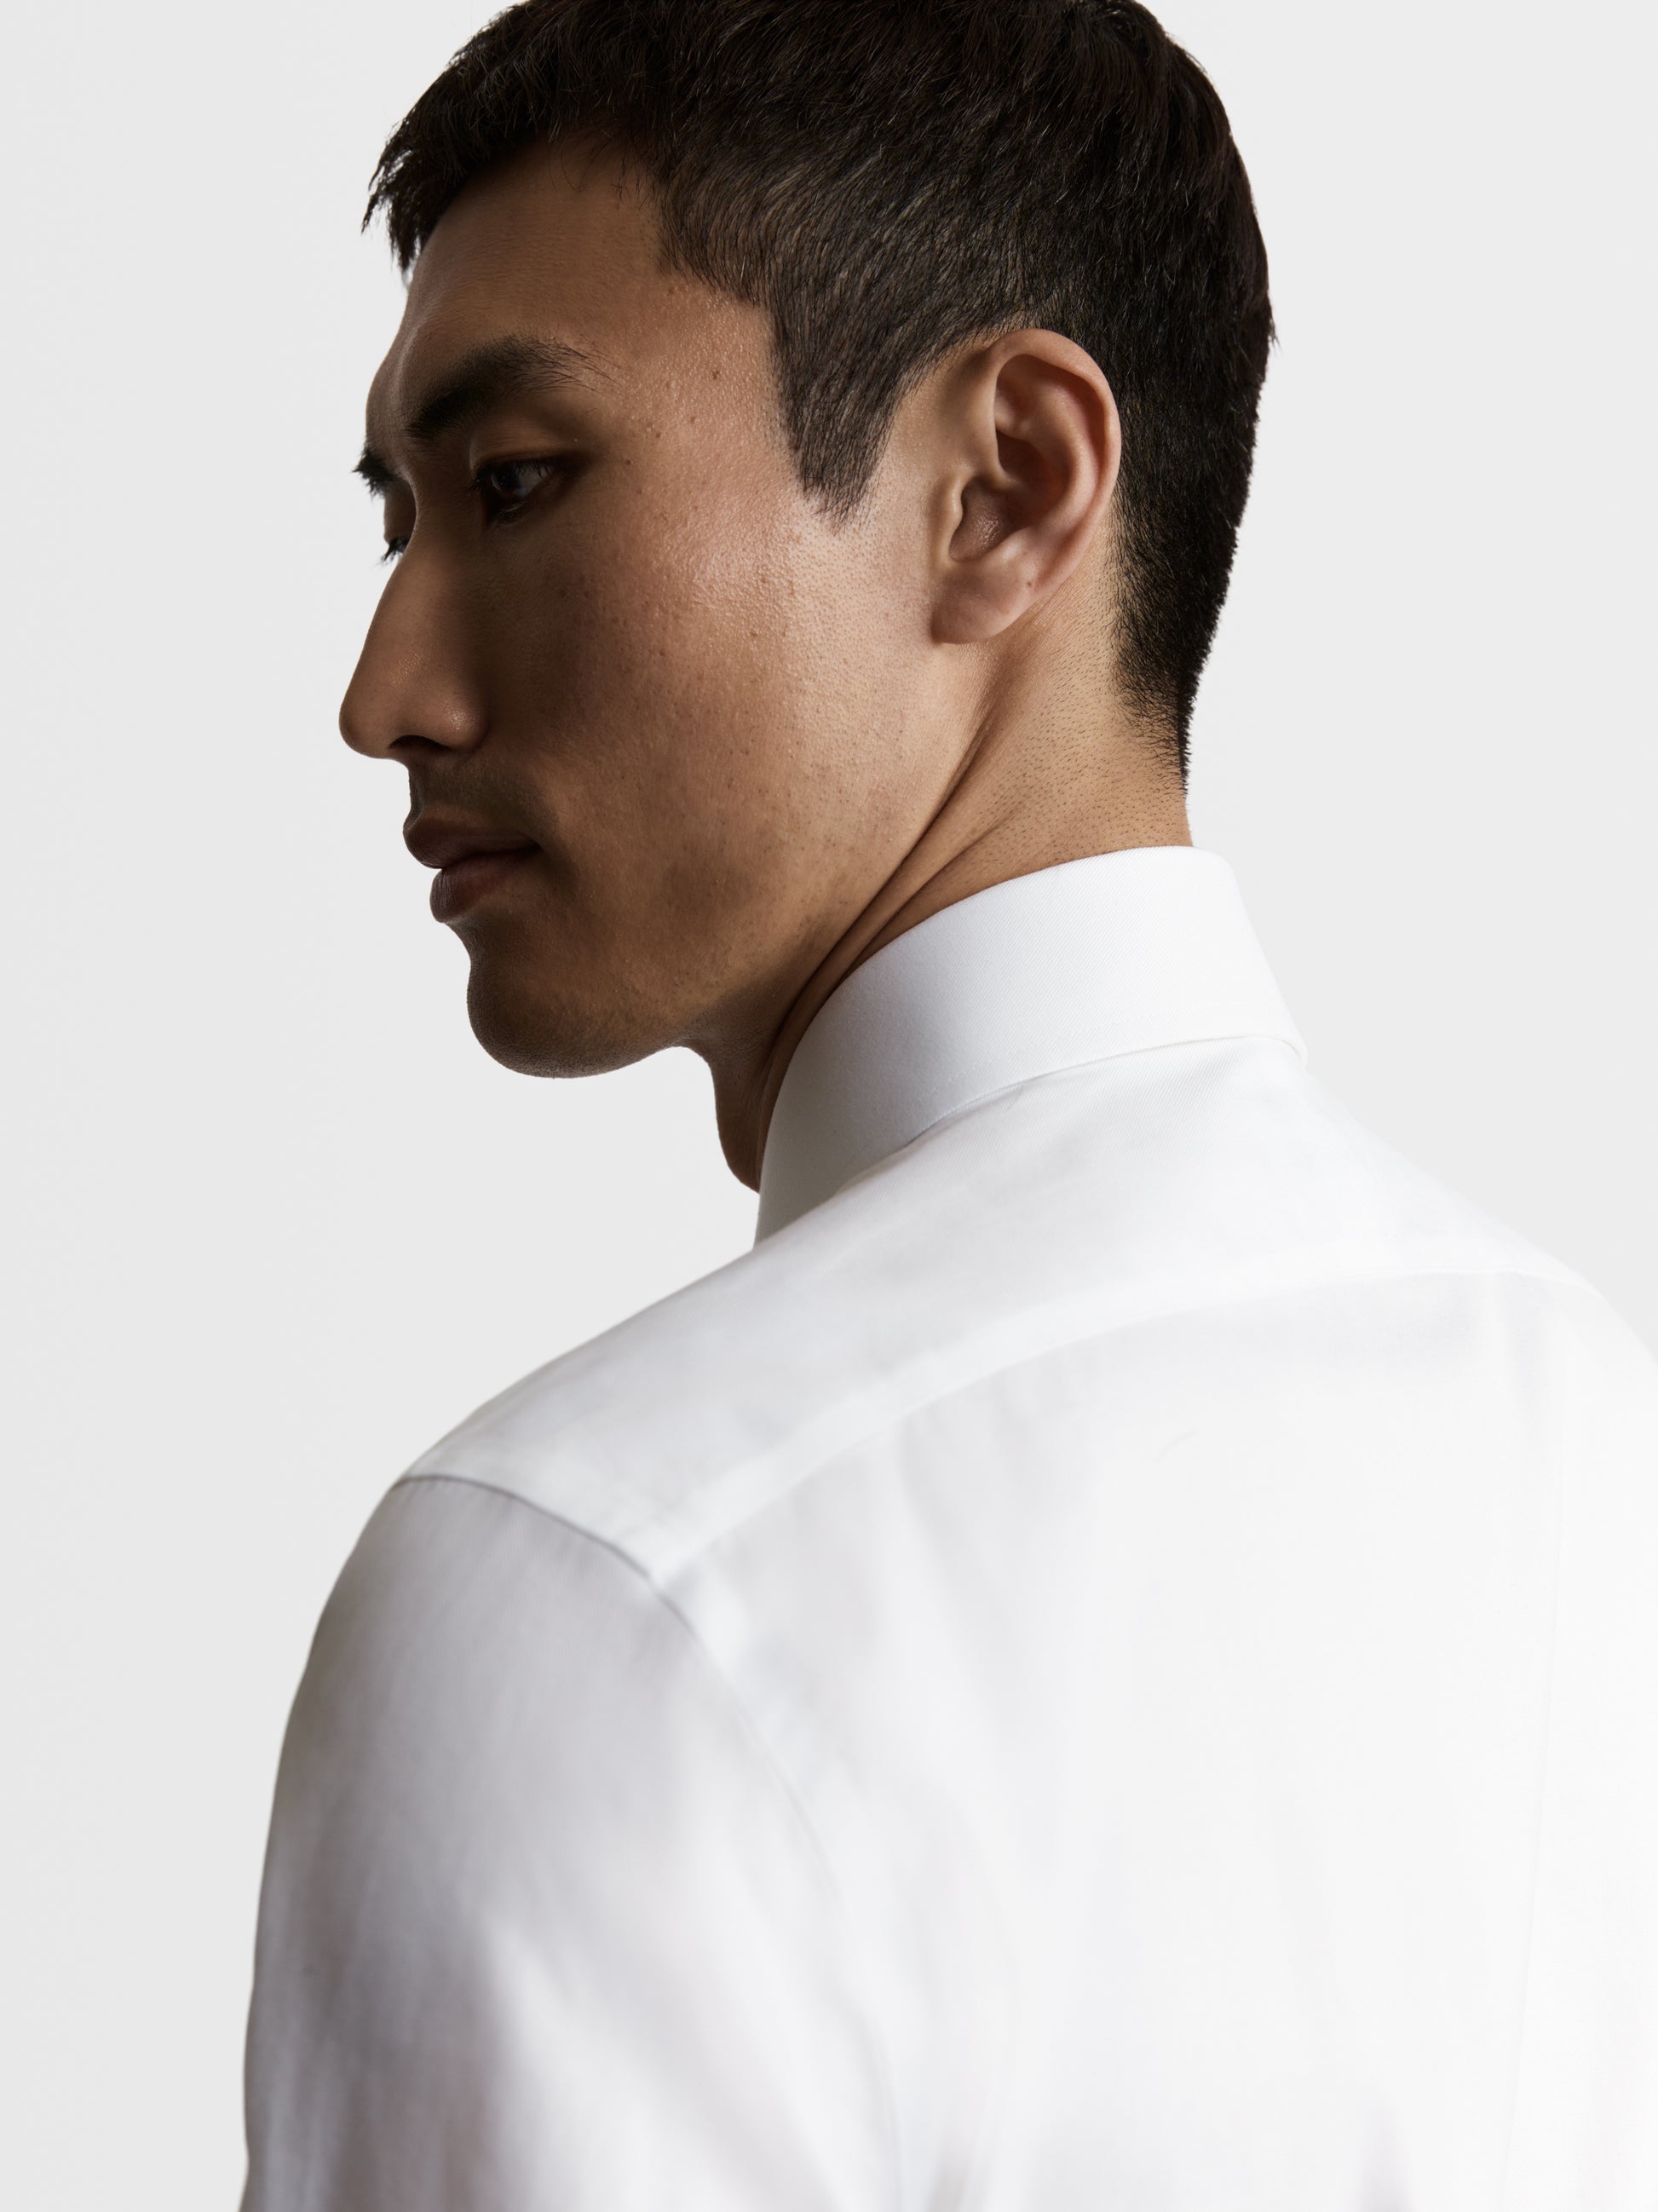 Image 3 of Max Performance White Twill Fitted Single Cuff Classic Collar Shirt